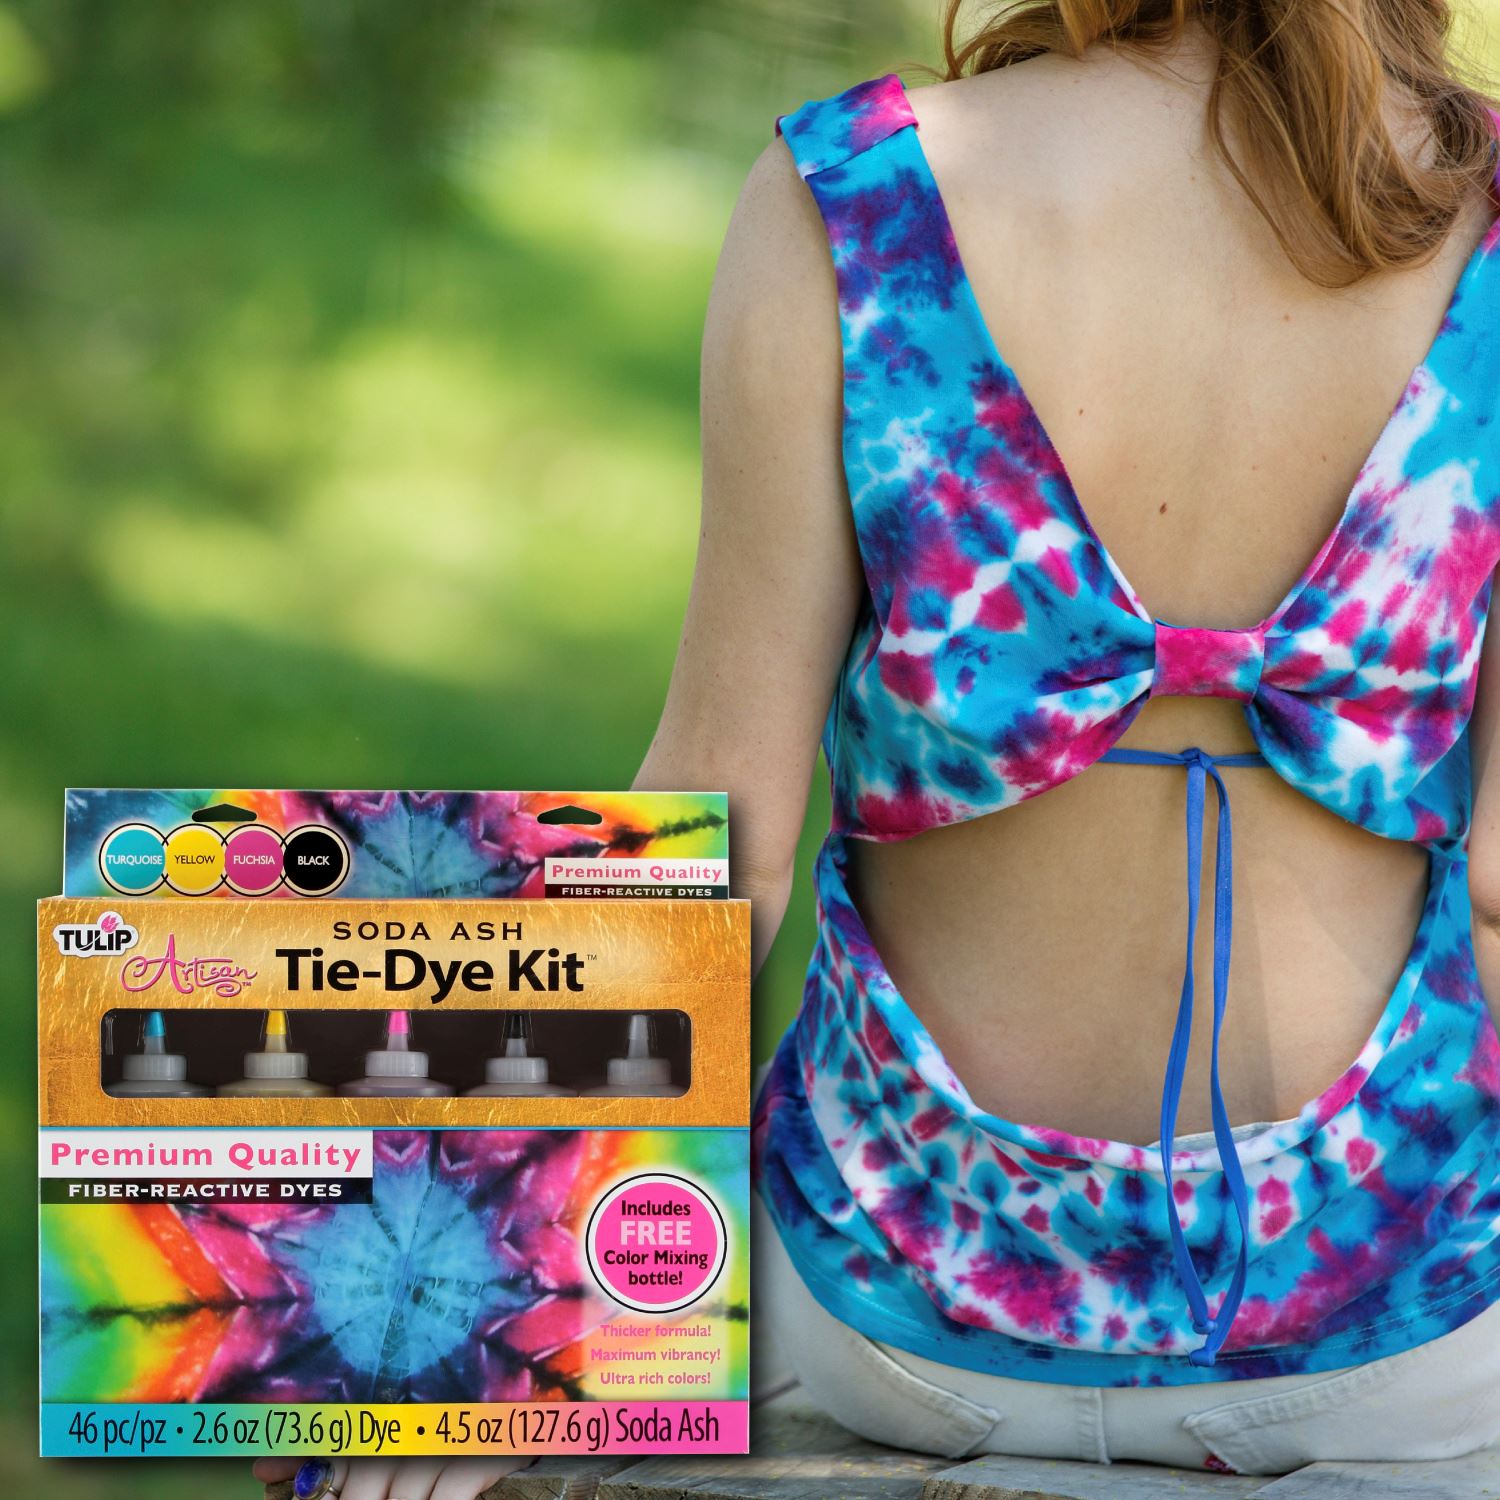 How to Tie Dye Face Masks with Tulip Soda Ash Kit